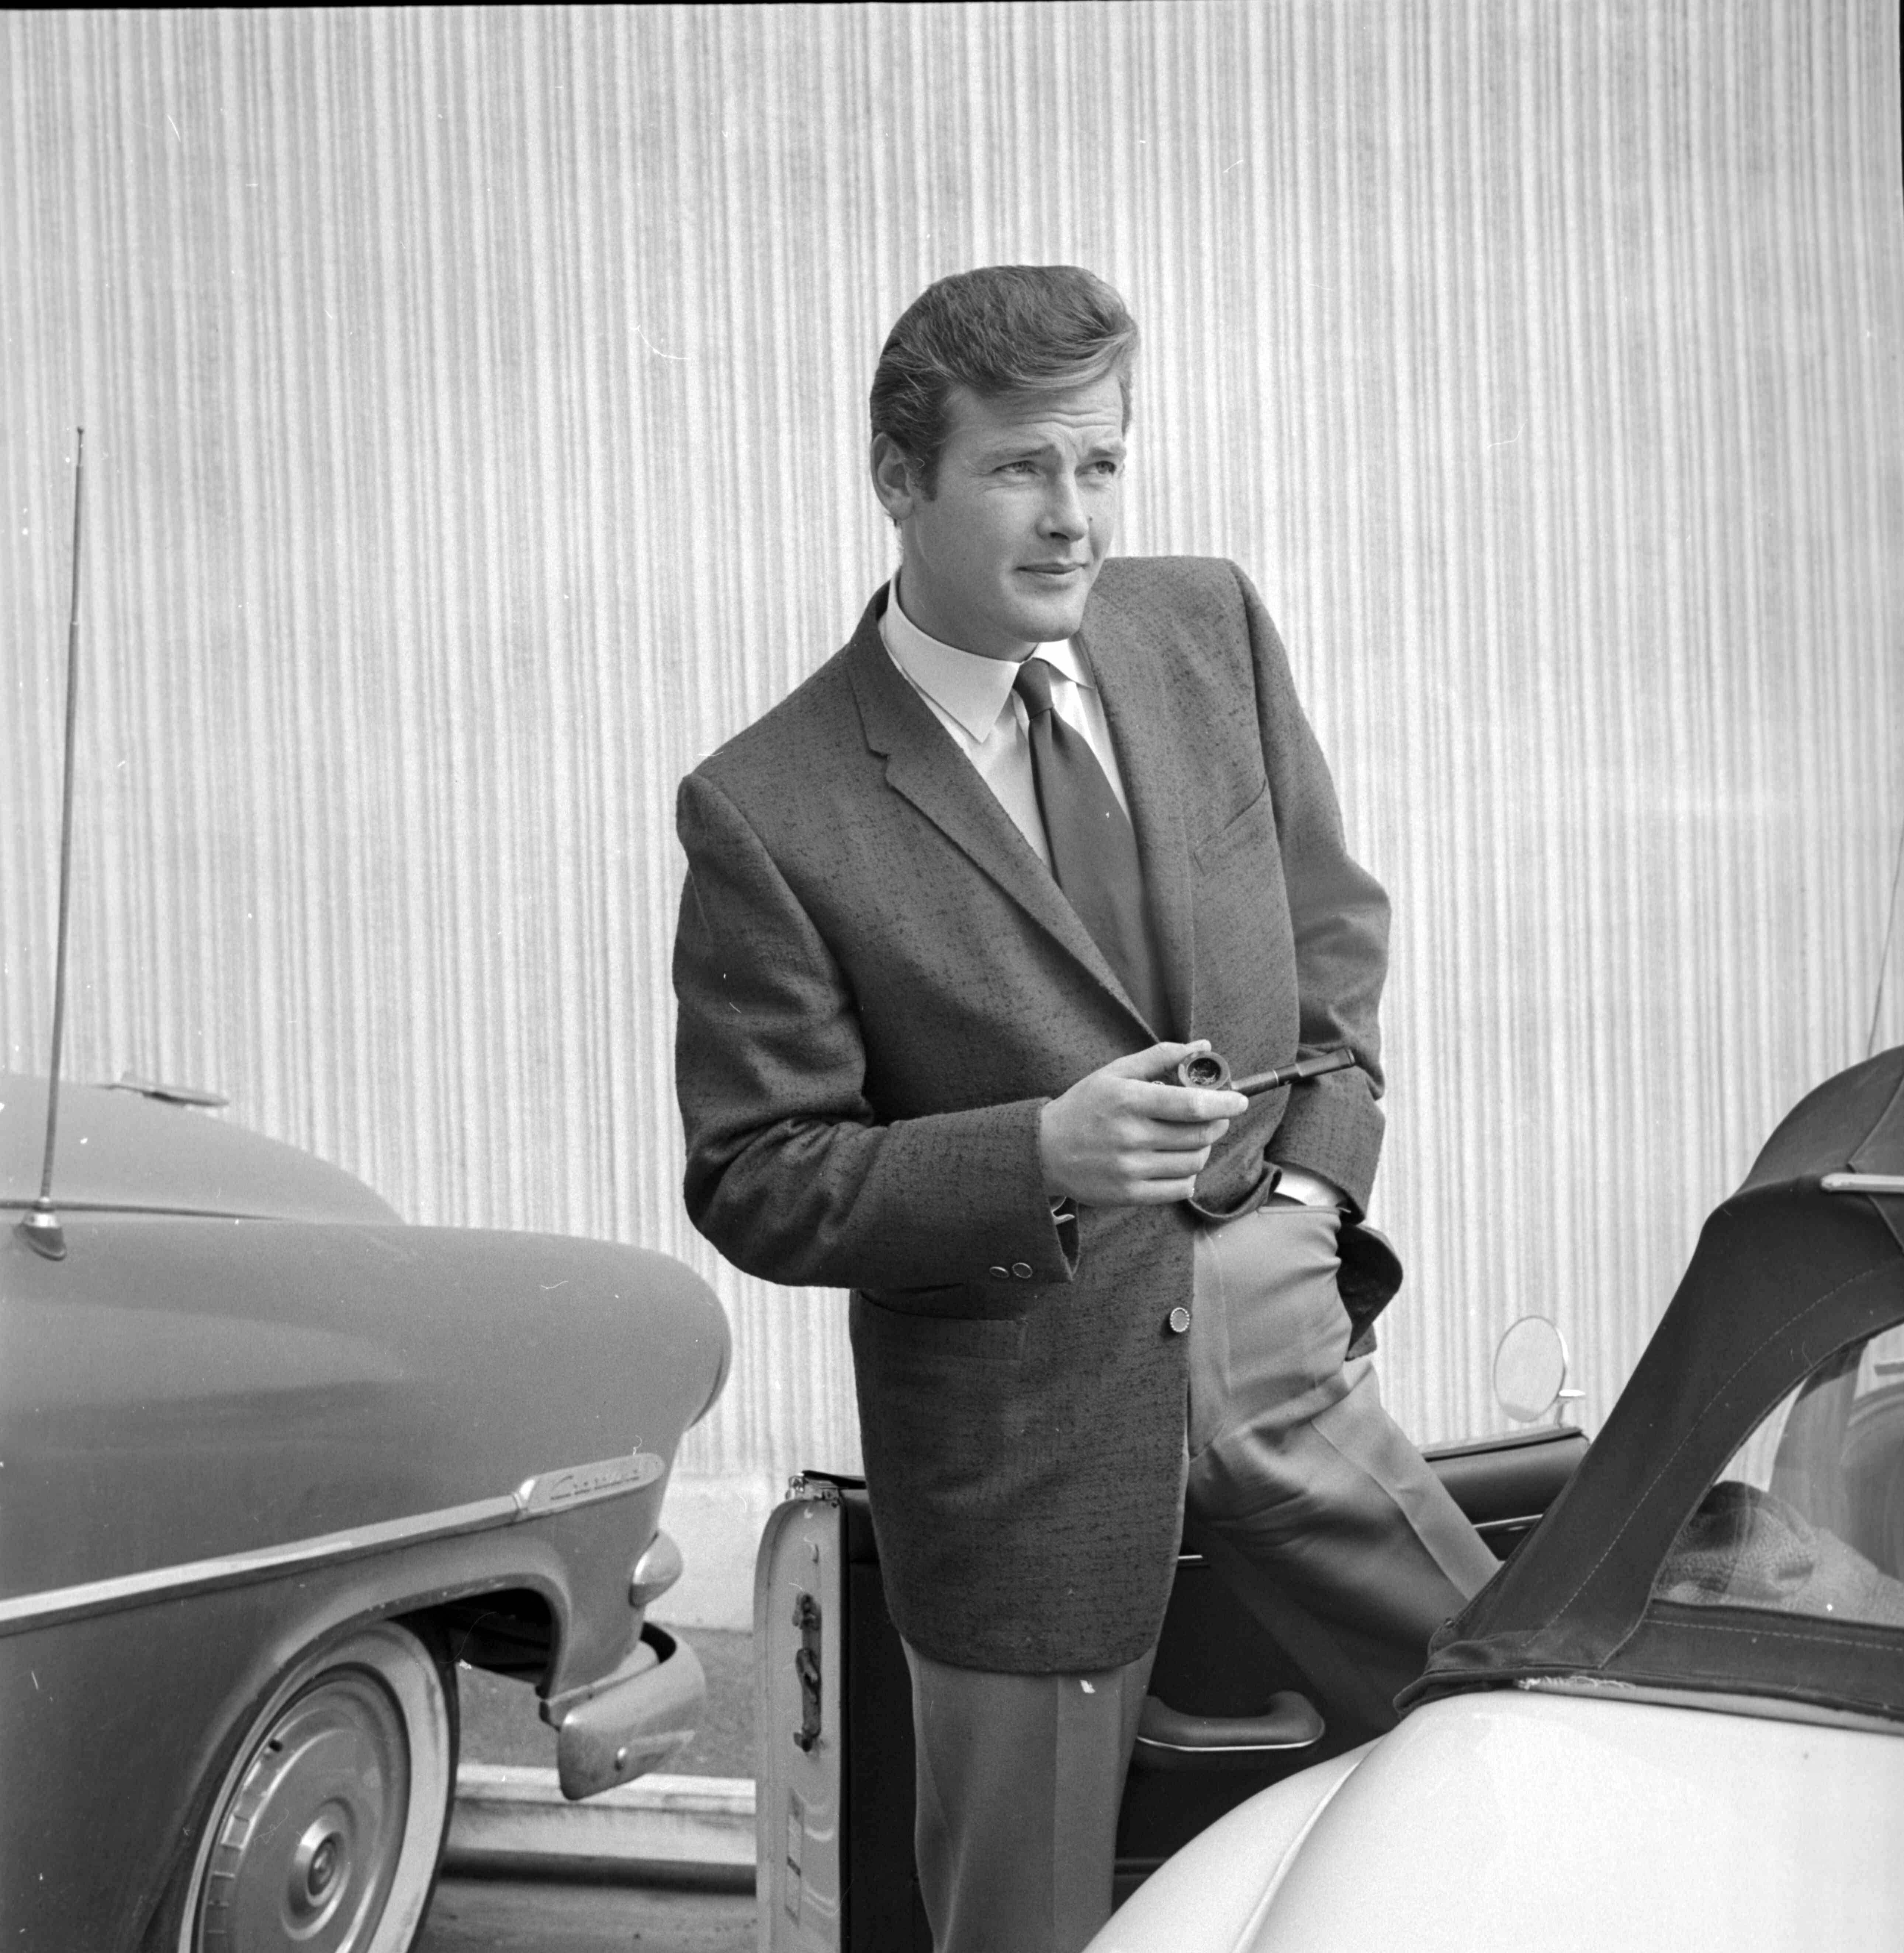 Larry Barbier Black and White Photograph - Roger Moore in Suit Fine Art Print